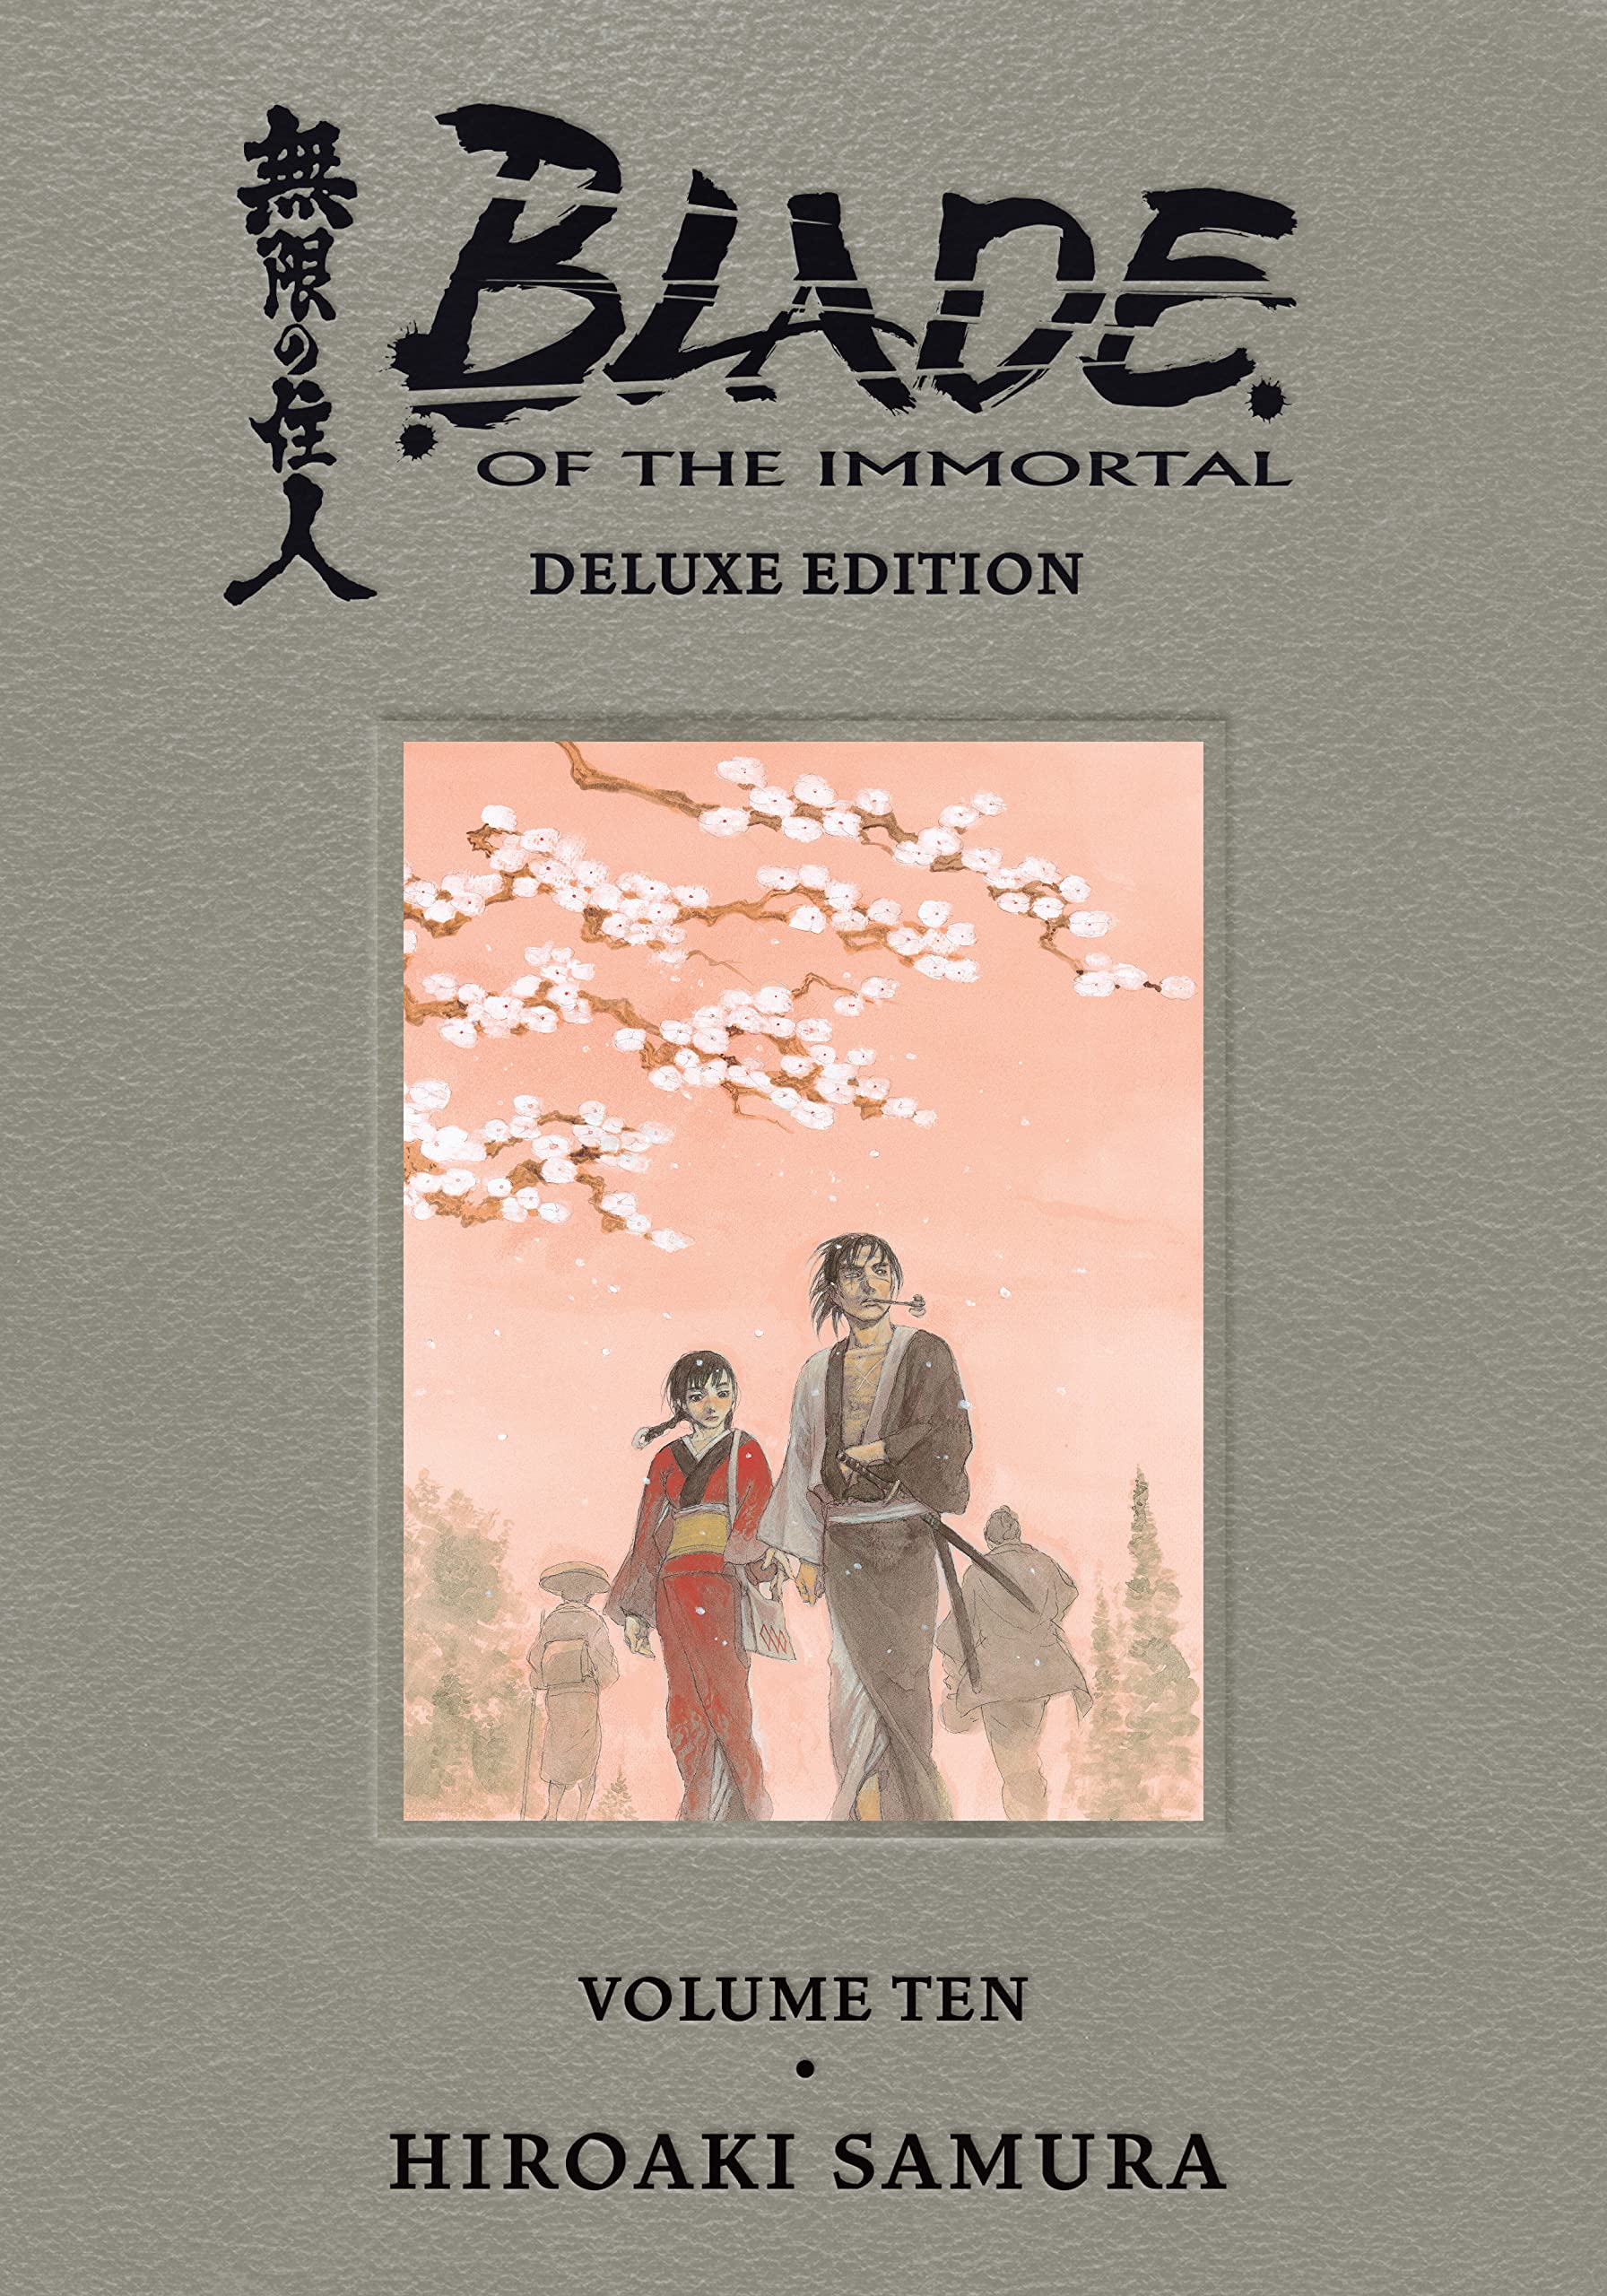 Blade of the Immortal Deluxe Edition Vol. 10